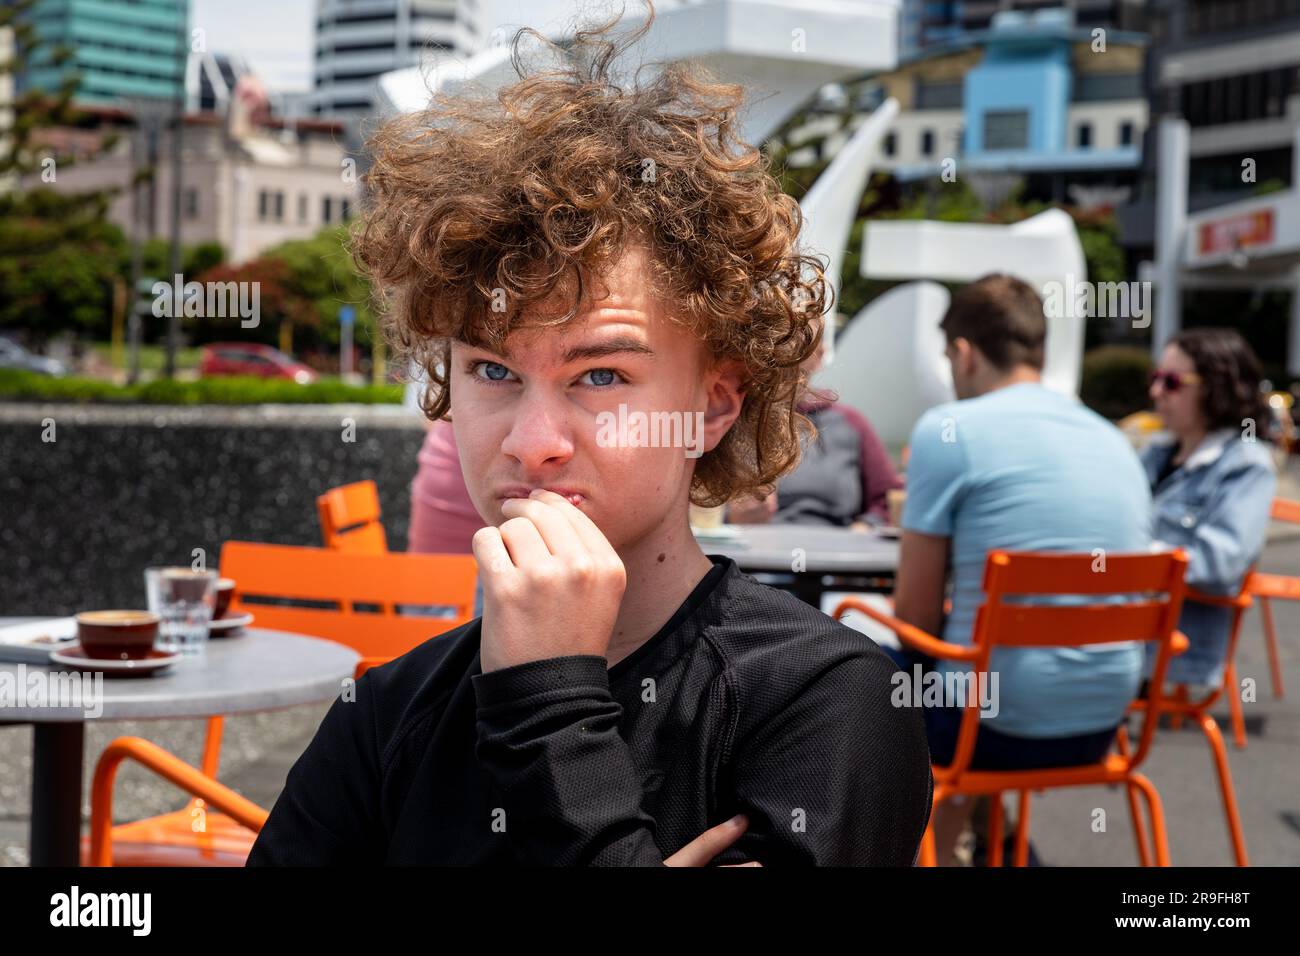 A boy with long curly hair at a cafe in Wellington, New Zealand, Capital City, Harbour, Recreation Area. Model Release available. Photo: Rob Watkins Stock Photo